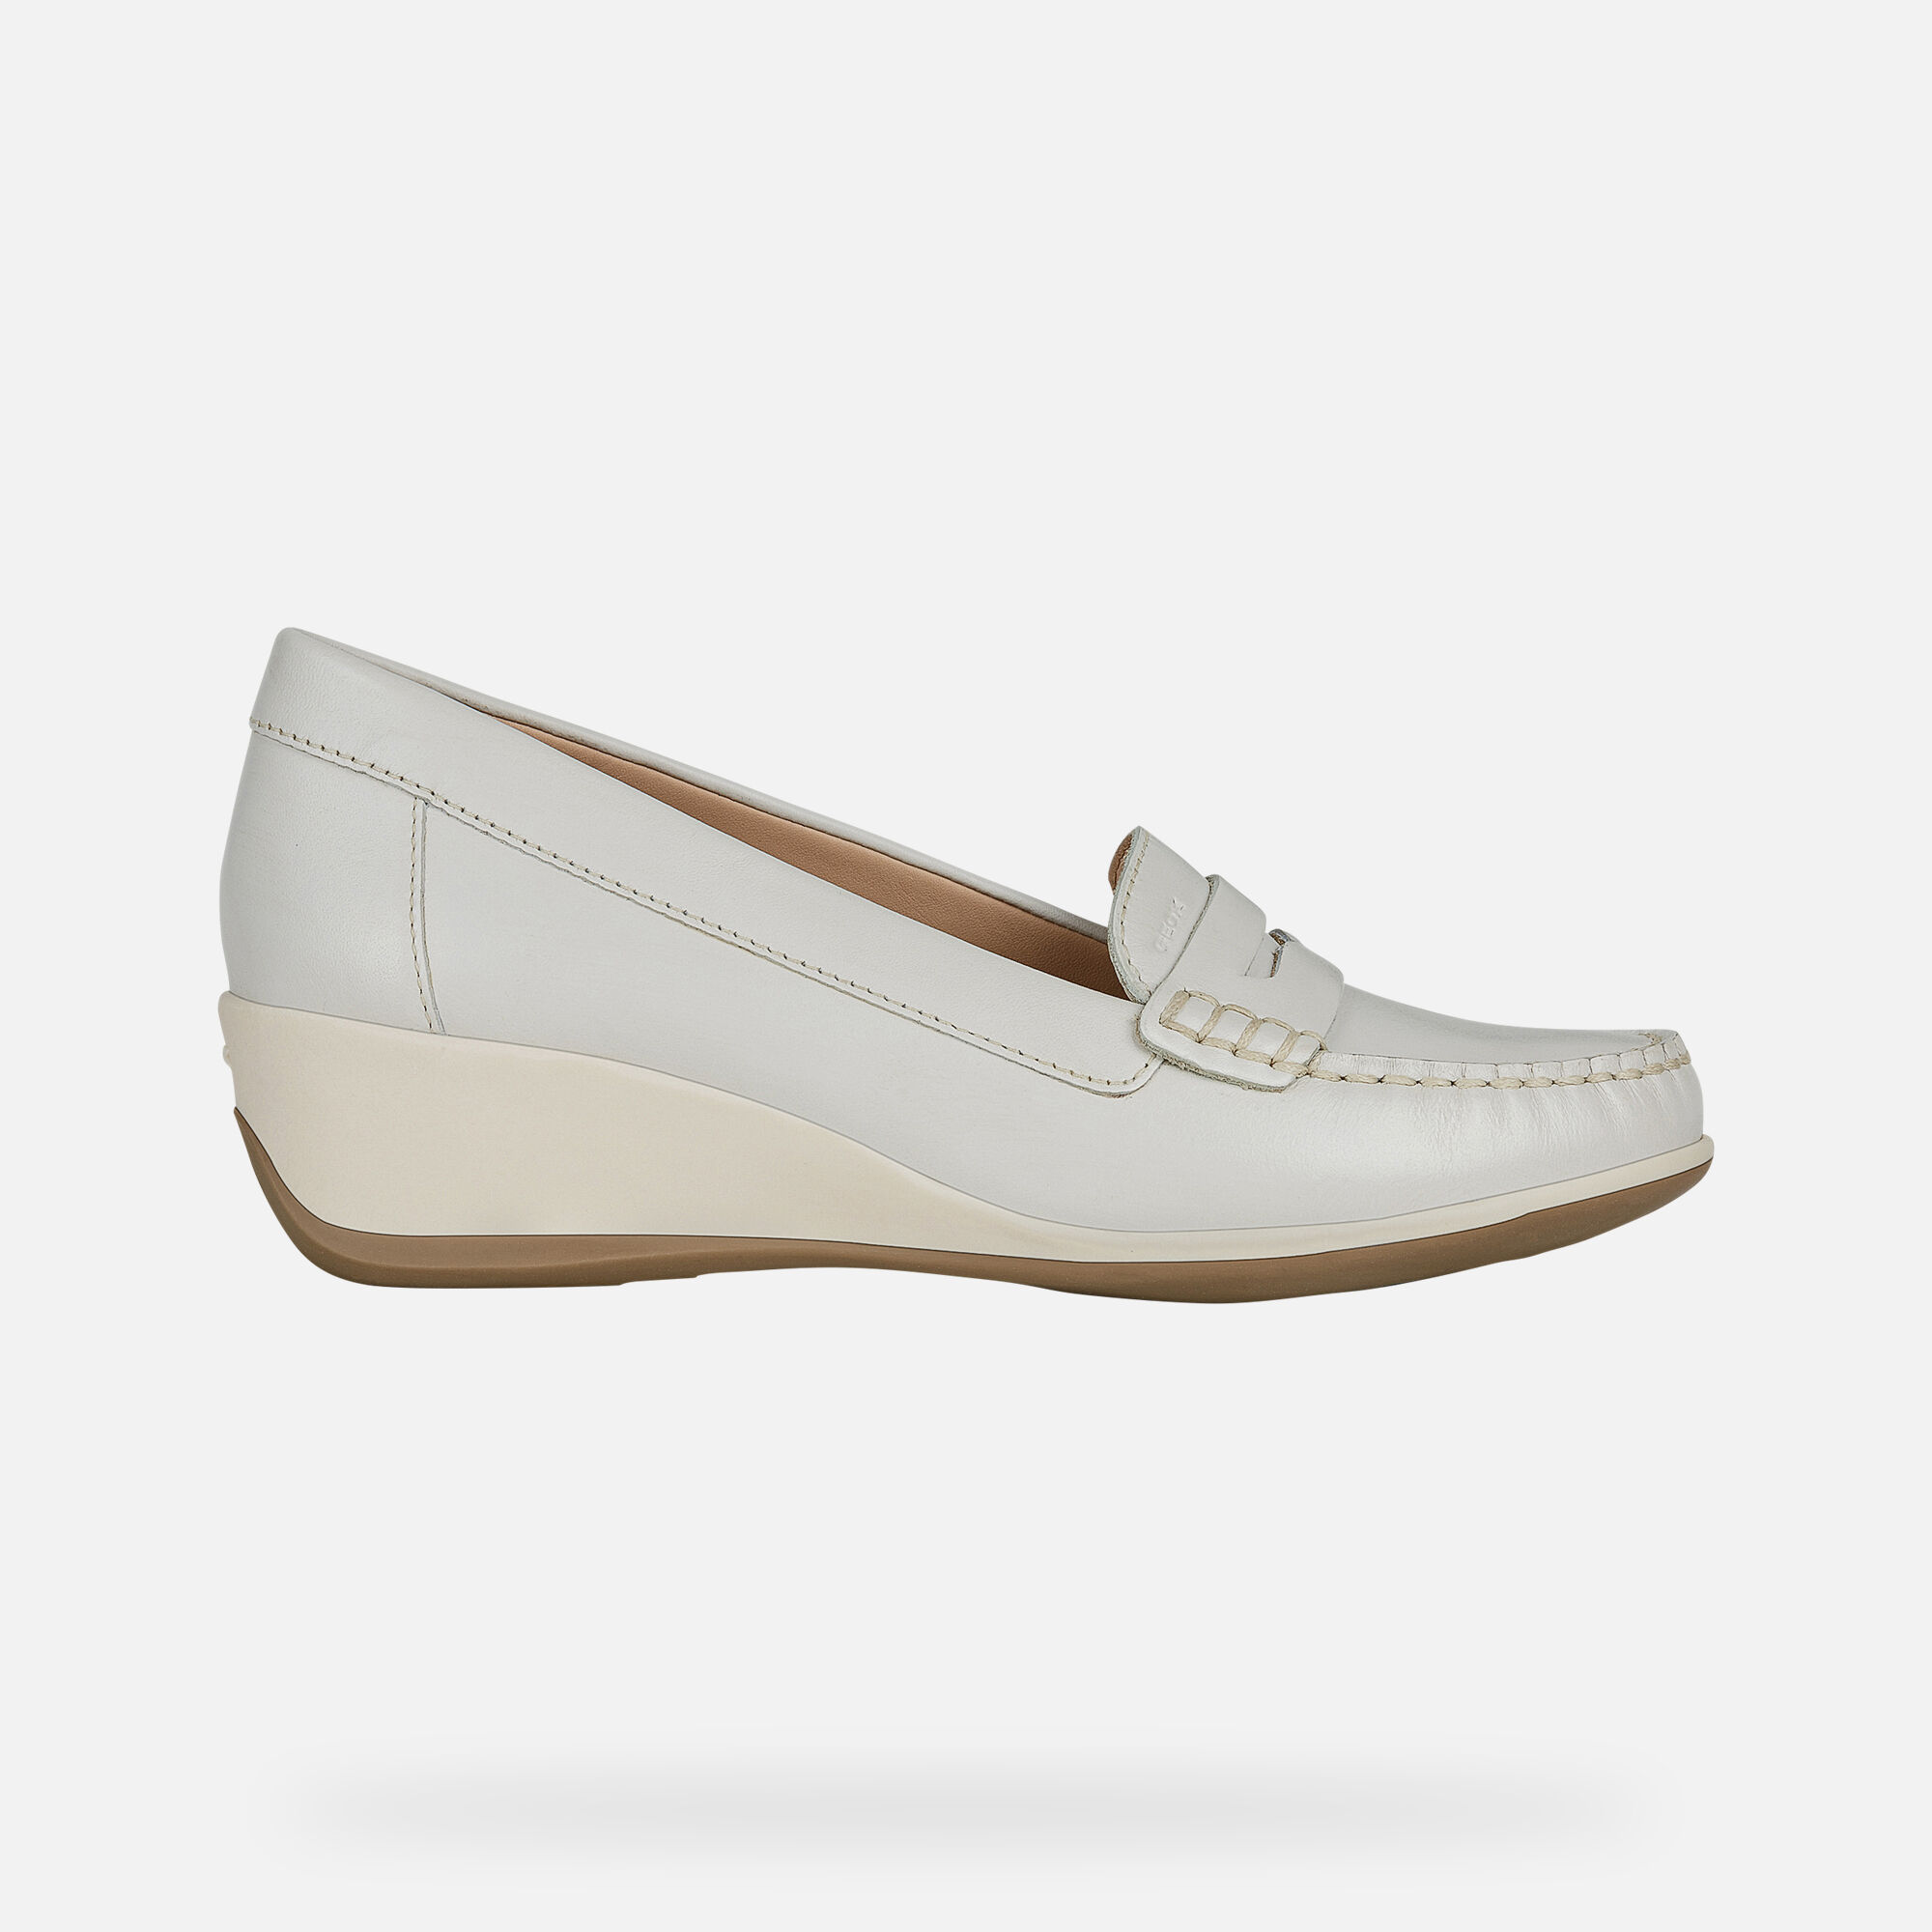 Geox ARETHEA Woman: Off White Loafers 